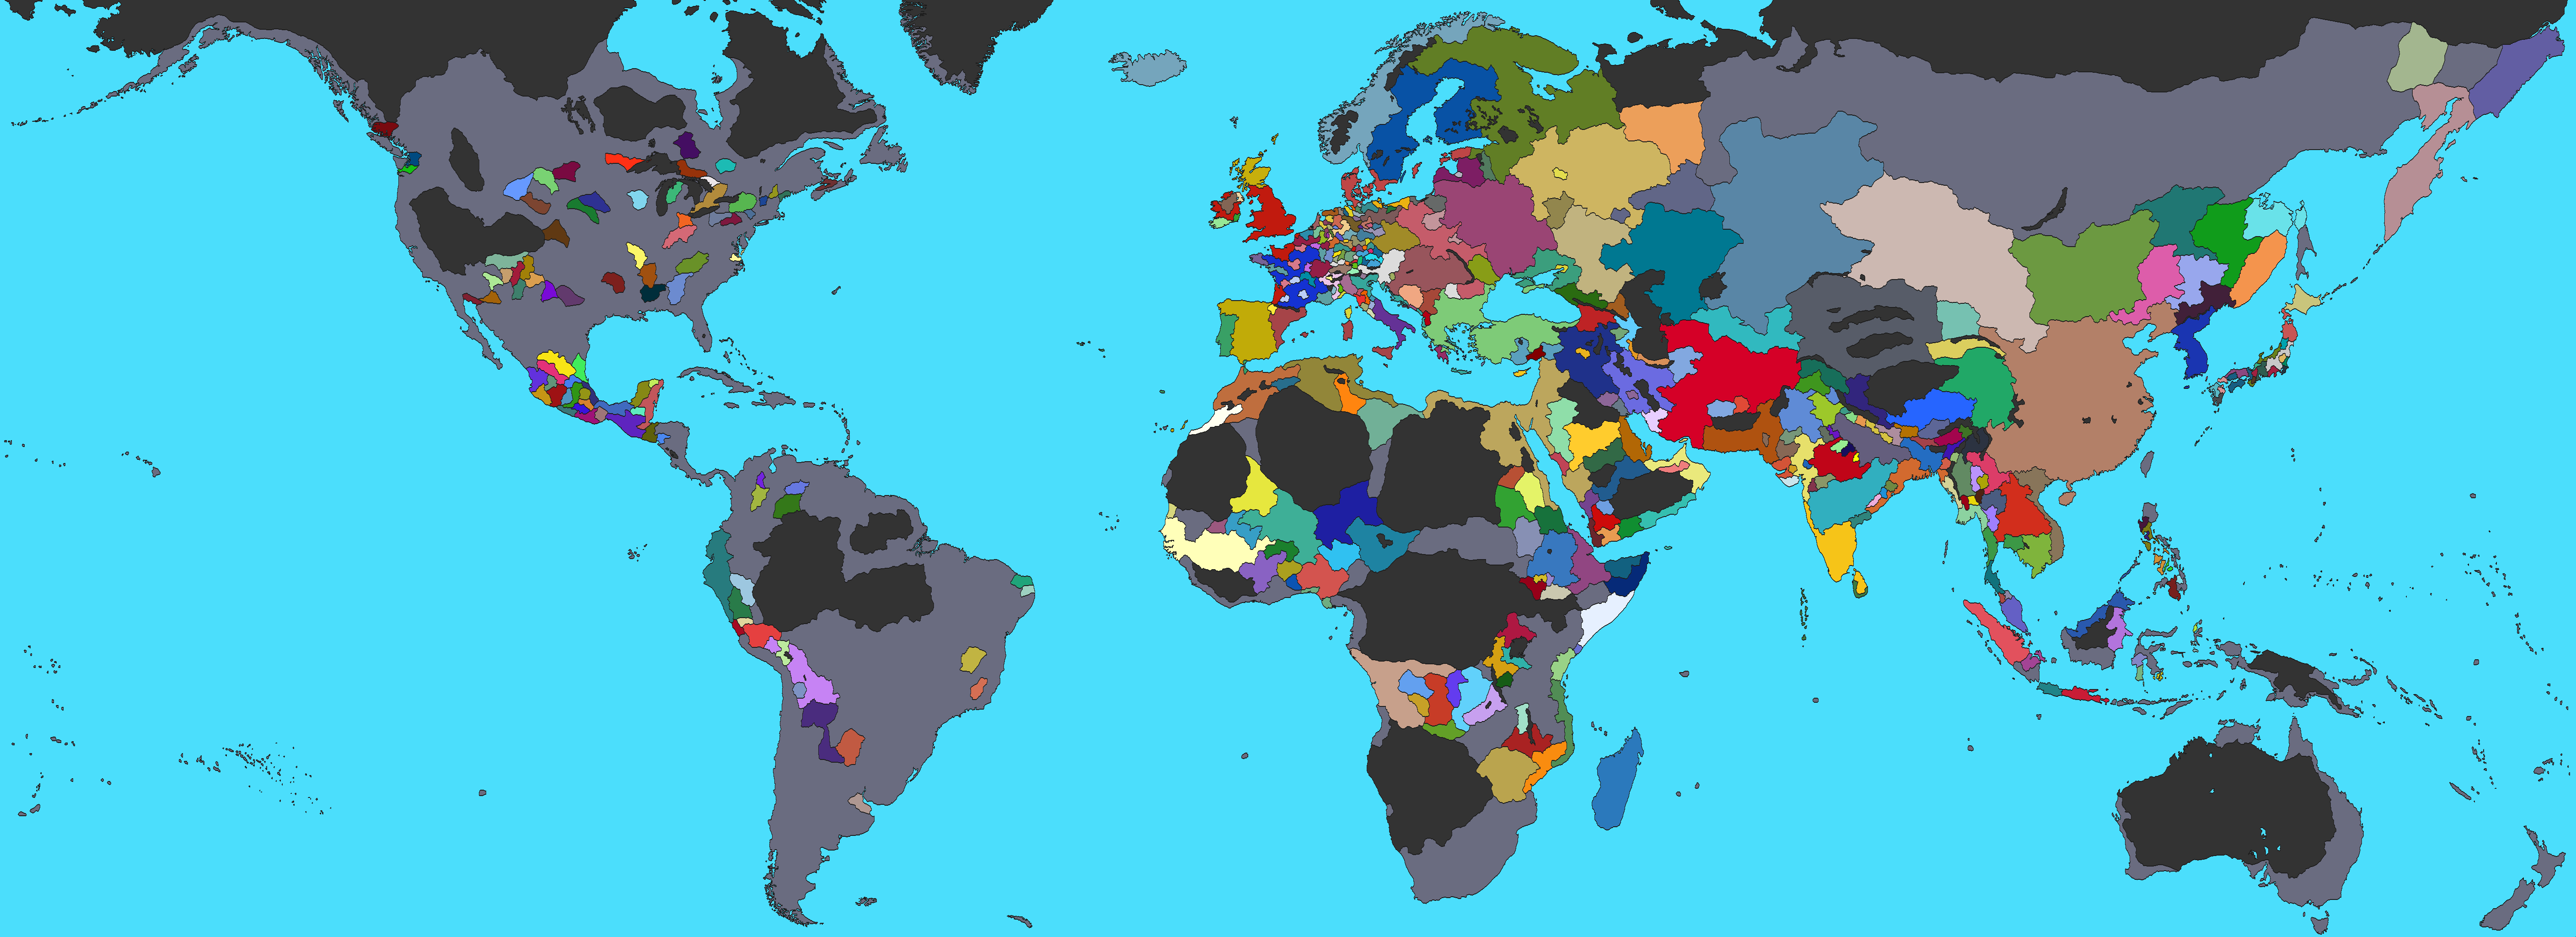 EU4 political map generated with Rakaly